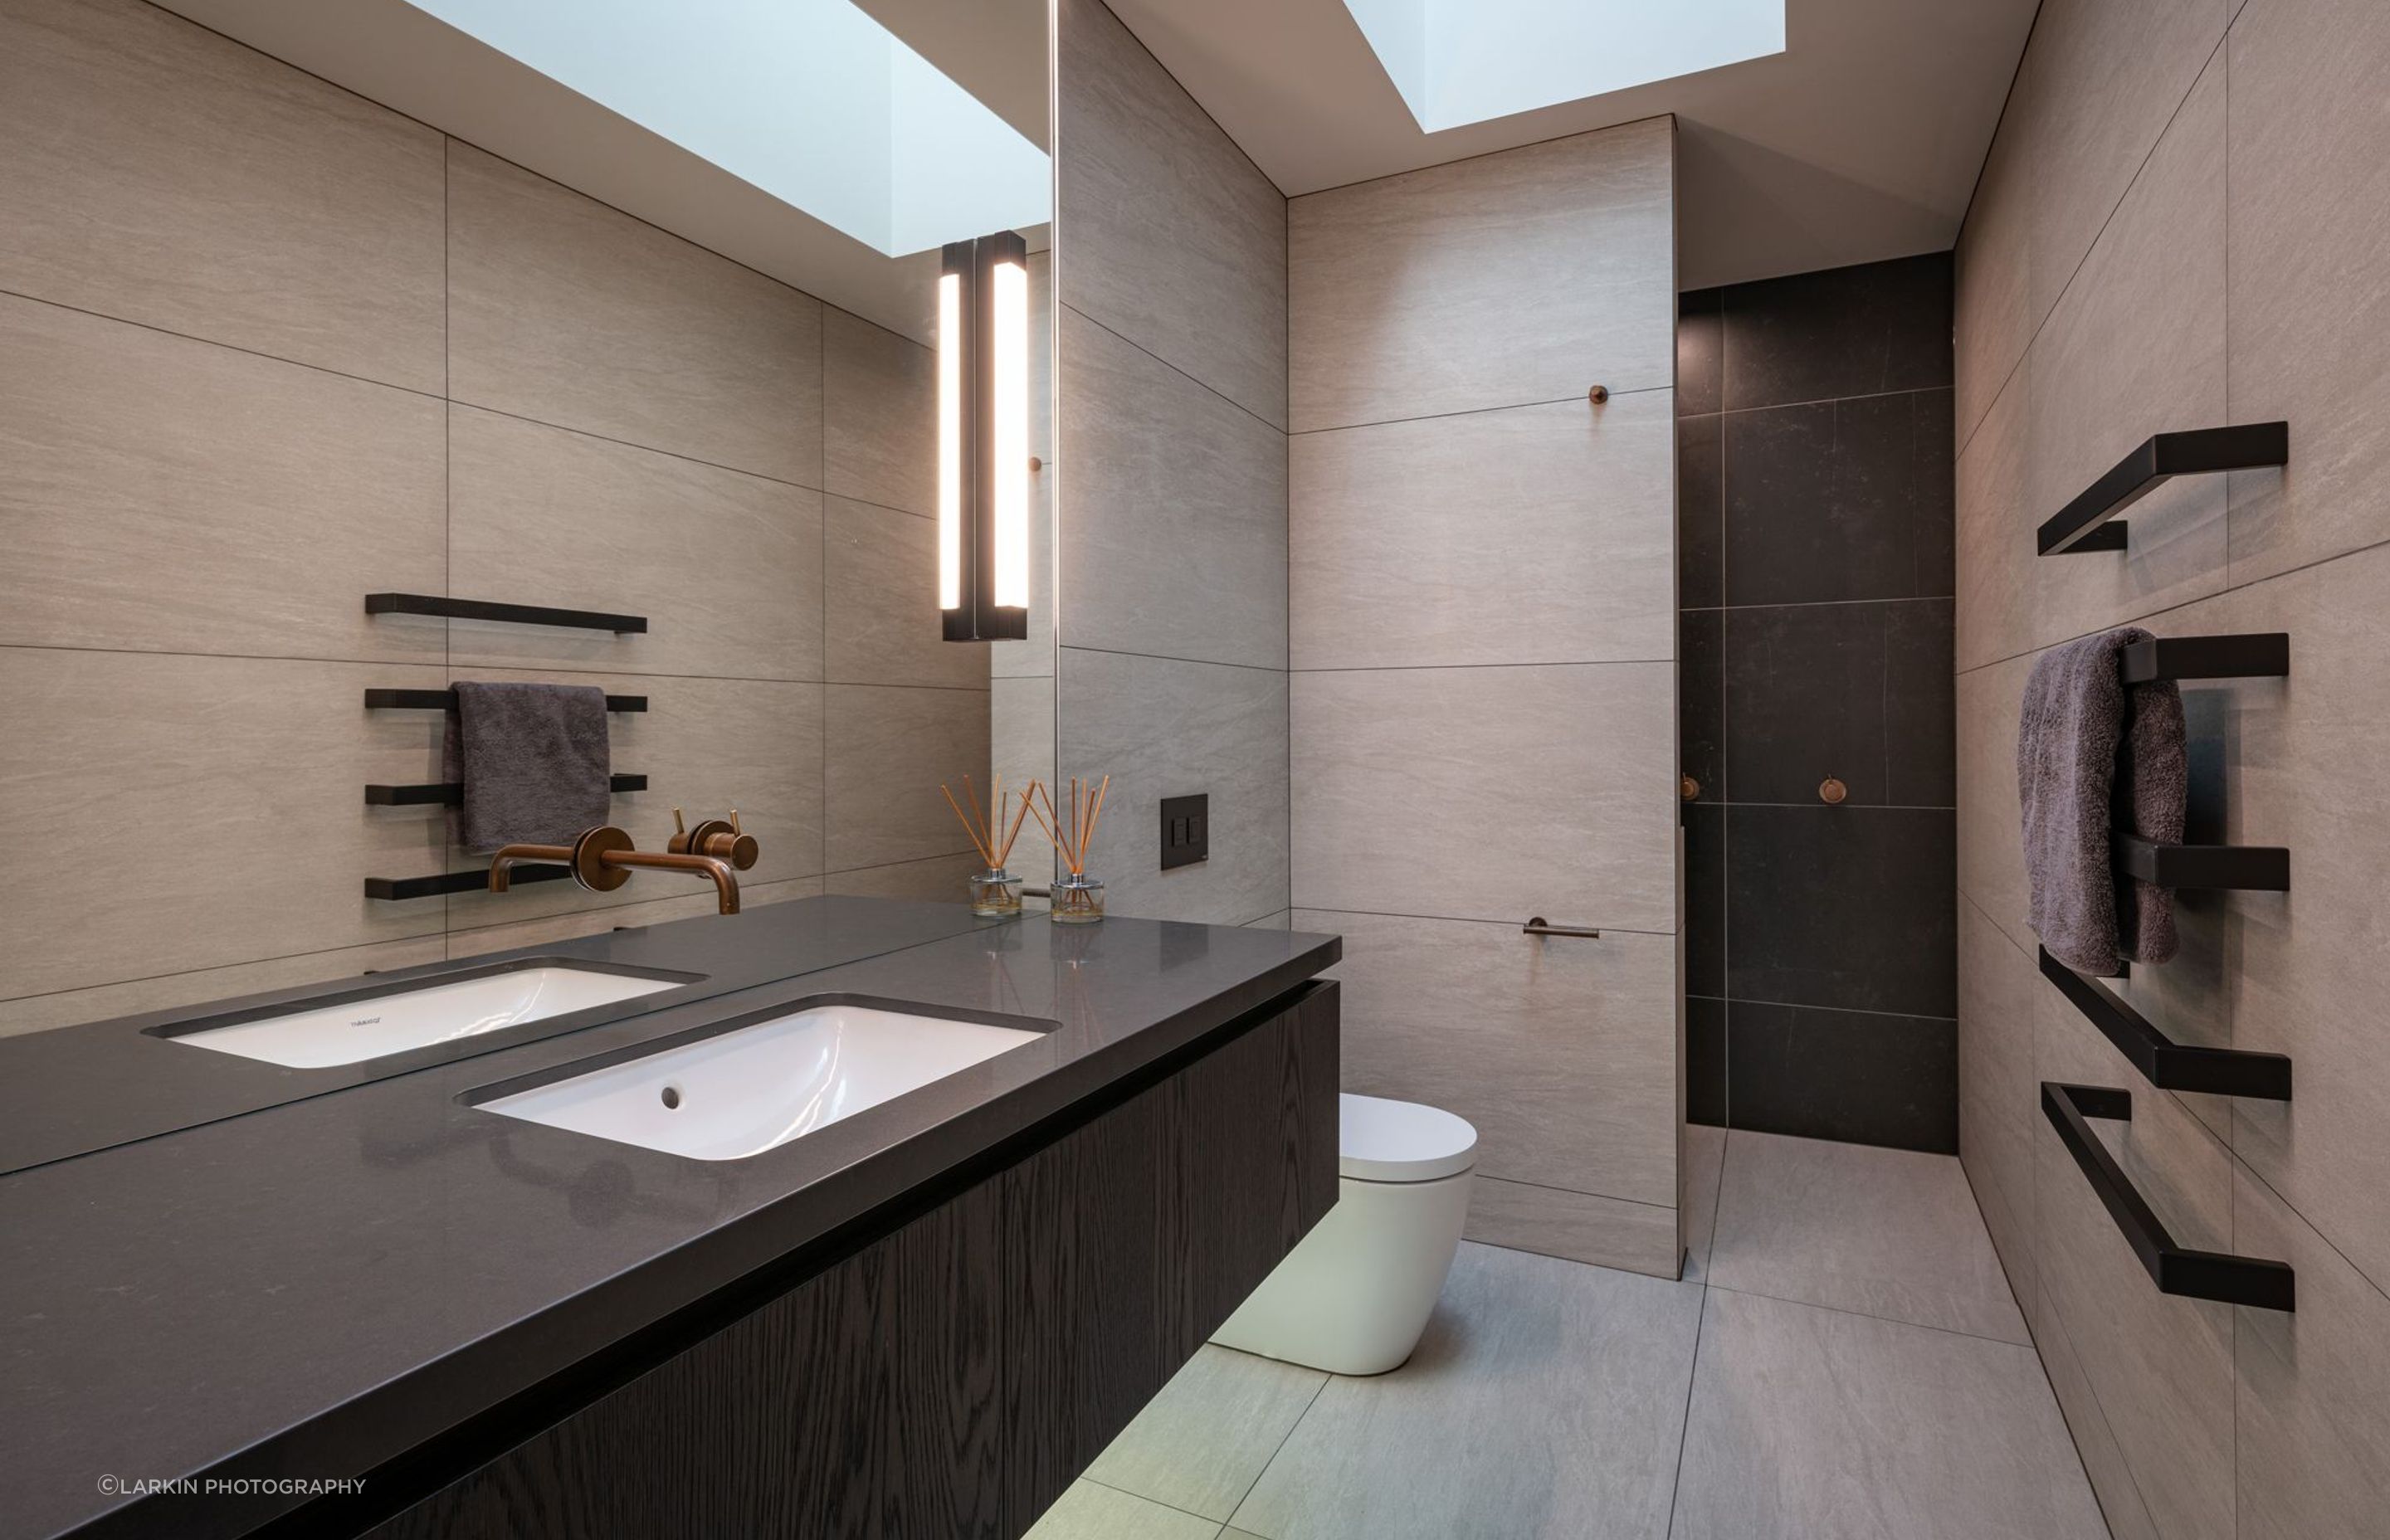 The family bathroom takes light in through a skylight and features dramatic monochromatic floor-to-ceiling tiles.